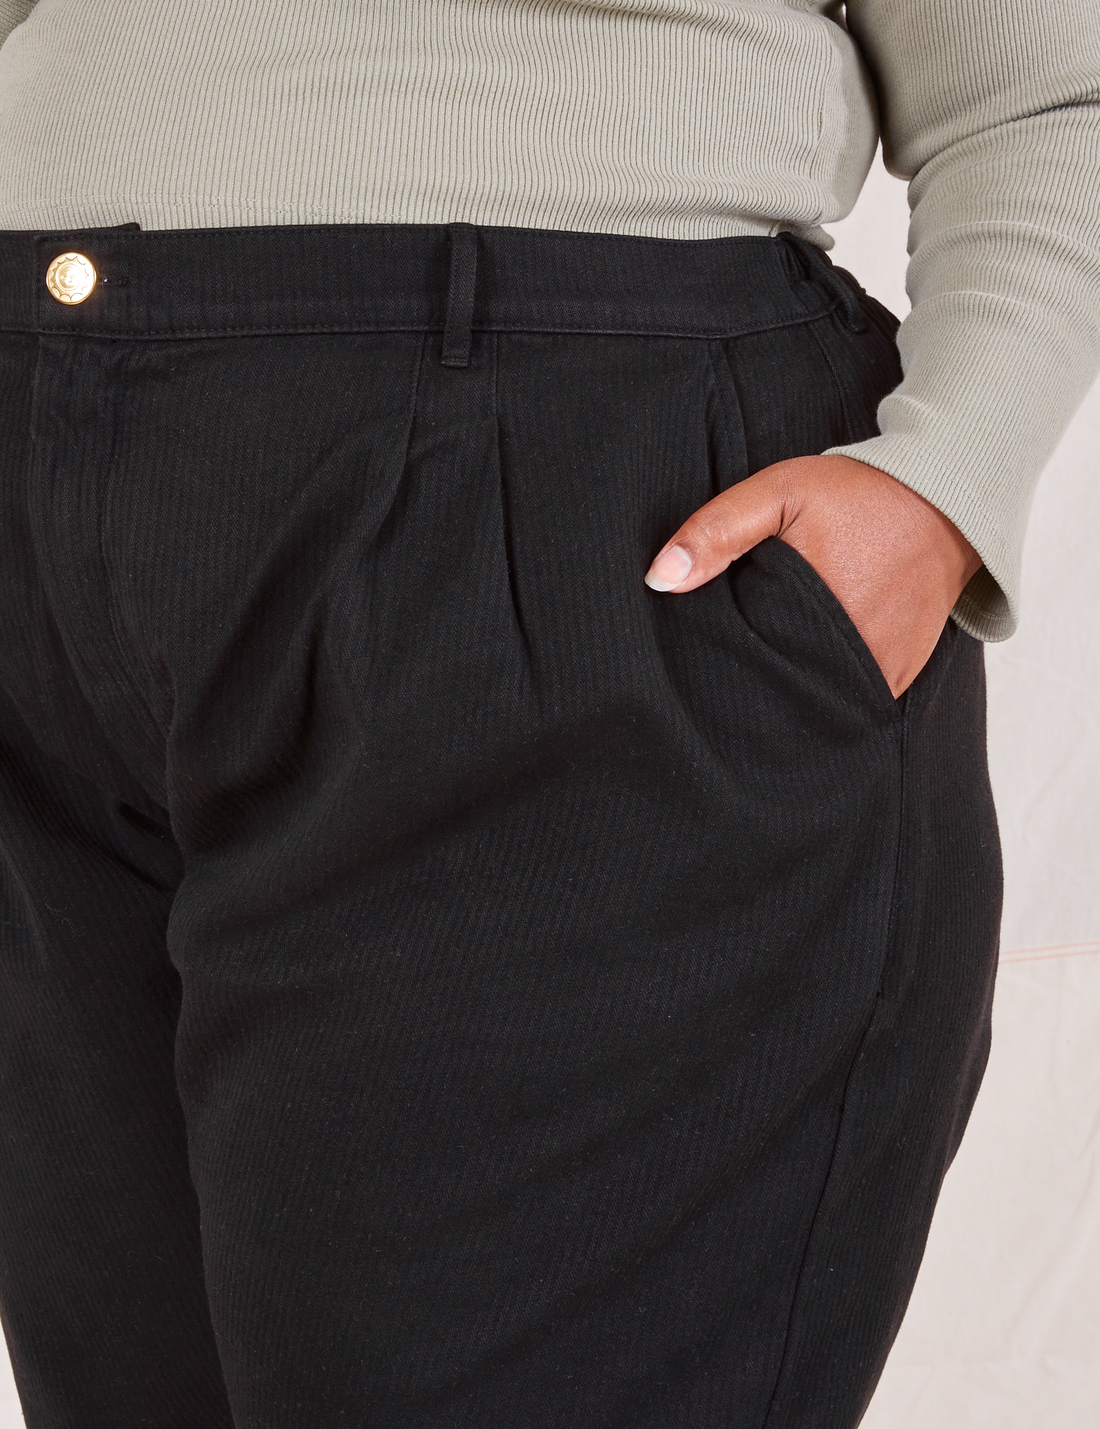 Front pocket close up of Heritage Trousers in Basic Black. Morgan has her hand in the pocket.